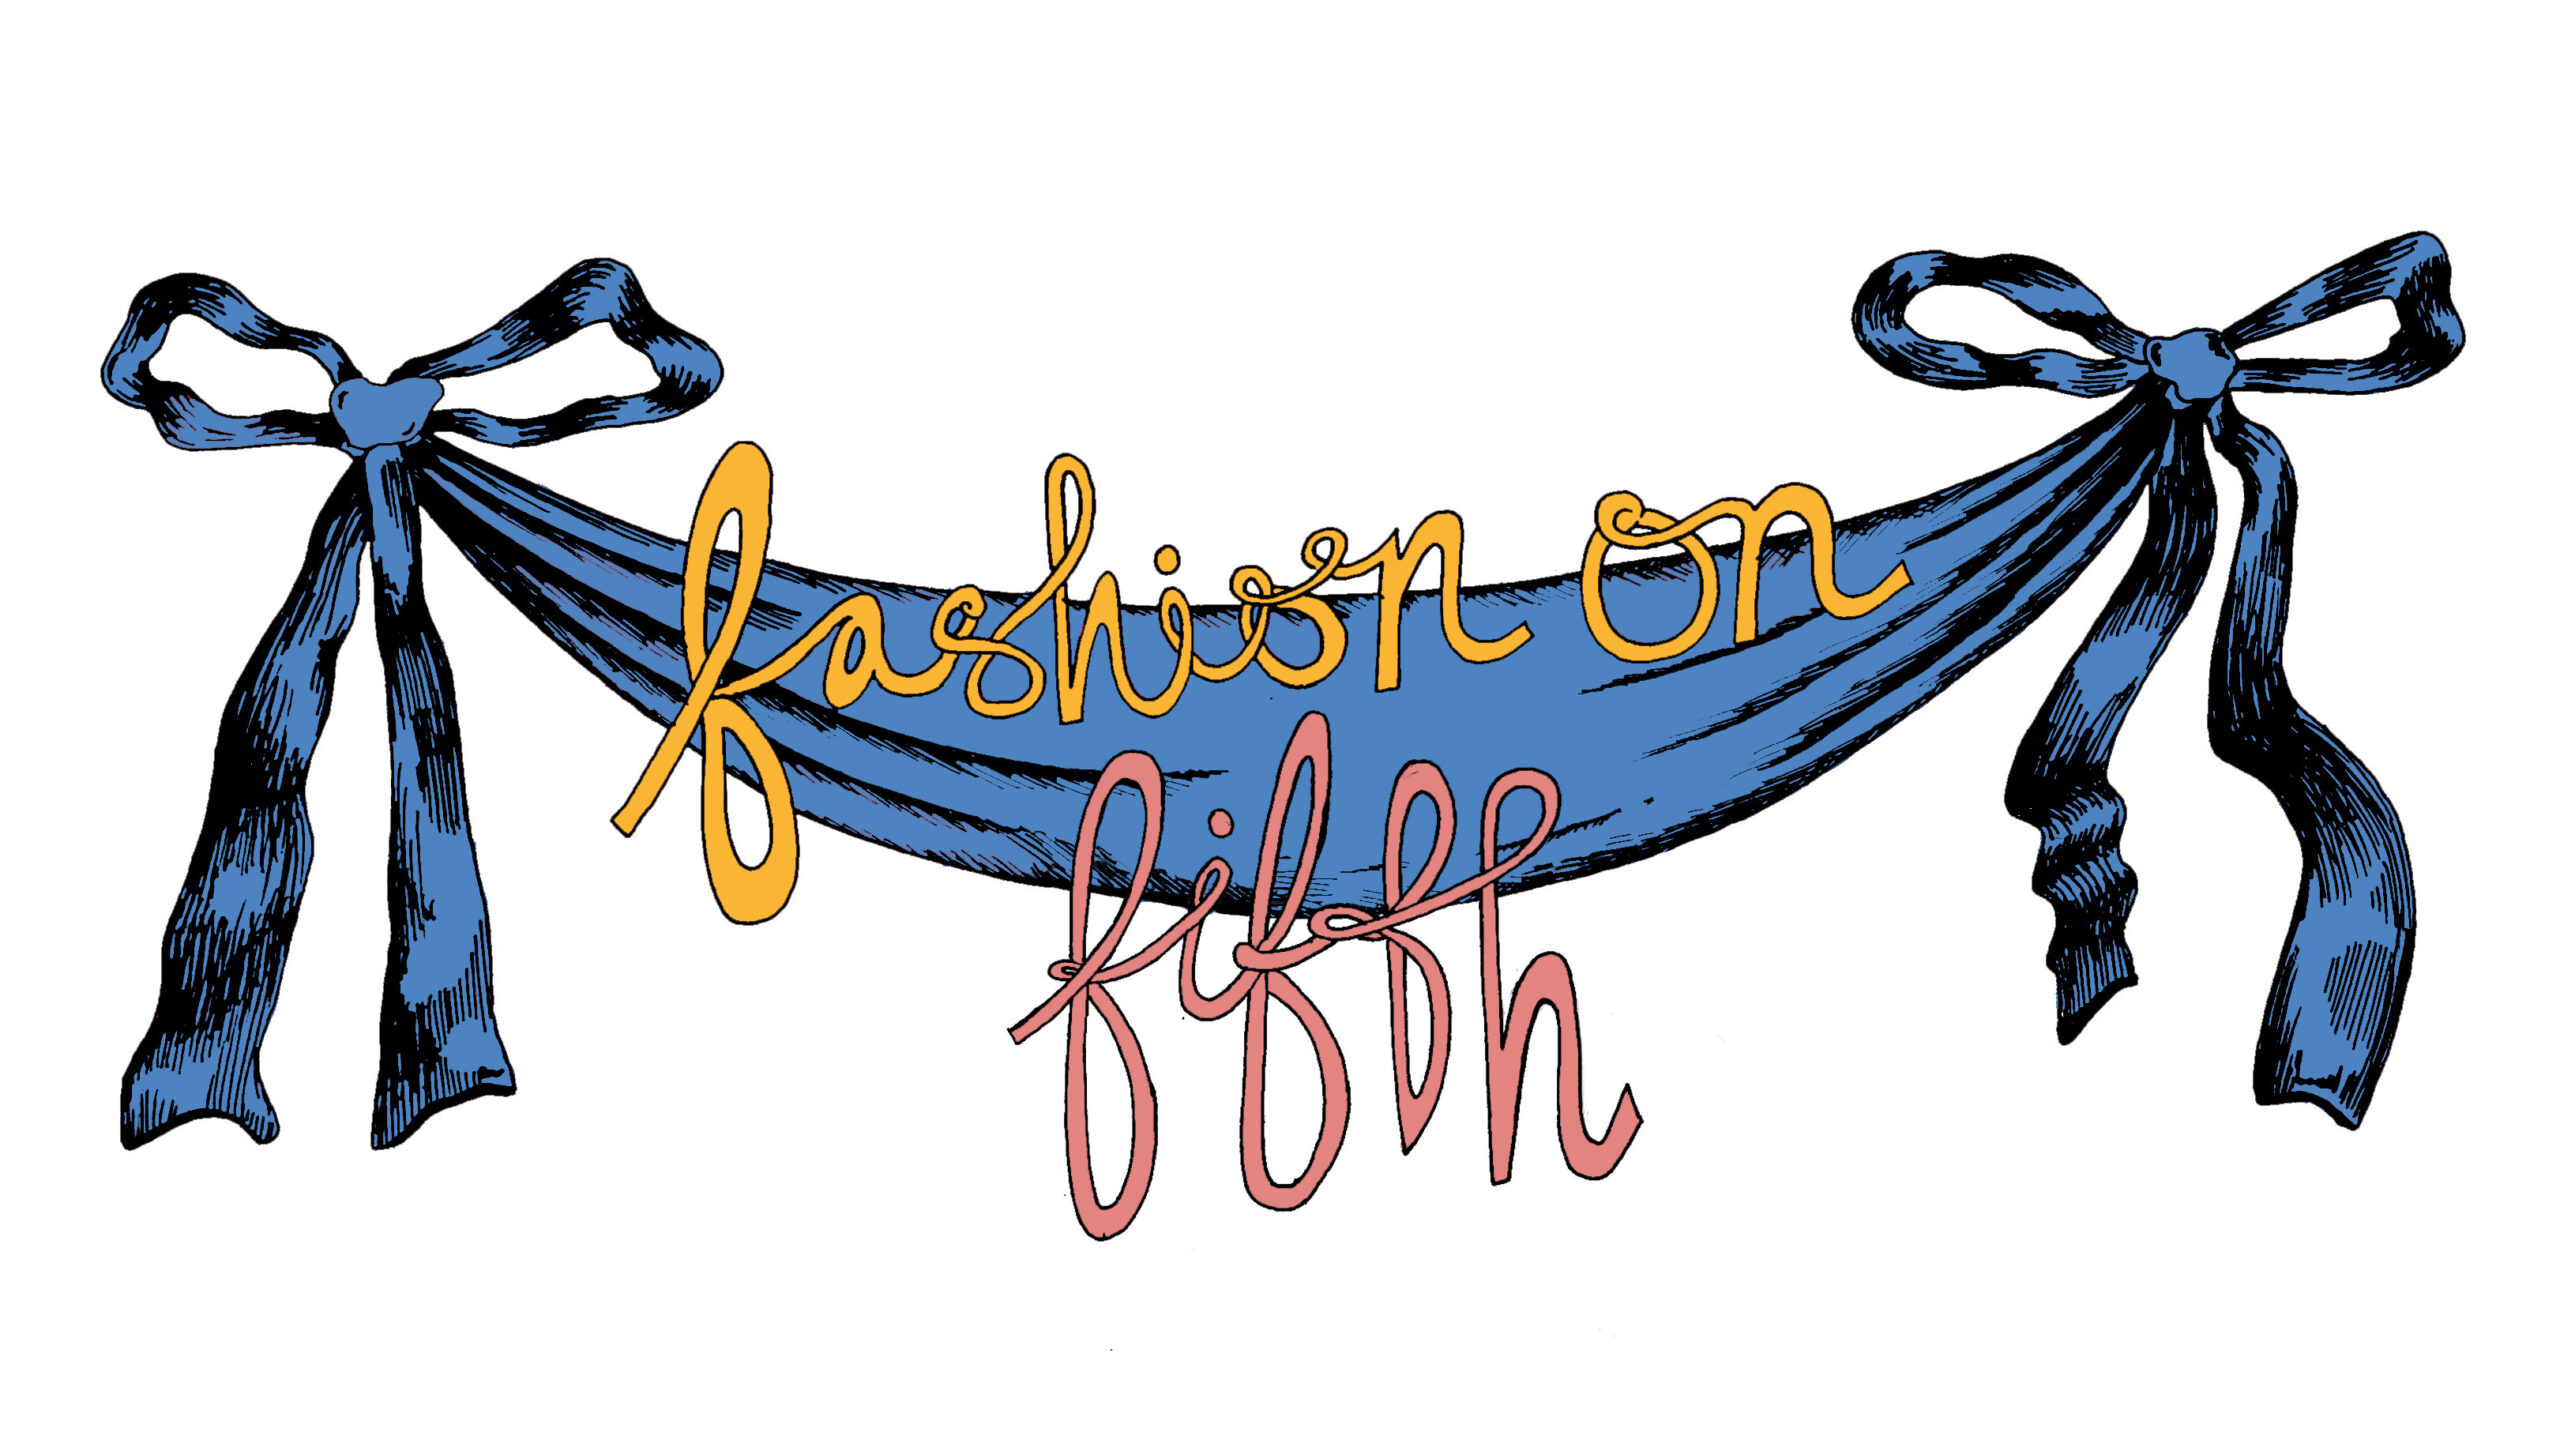 Blue banner with bows on either end that says “Fashion on Fifth” in yellow and pink cursive letters.